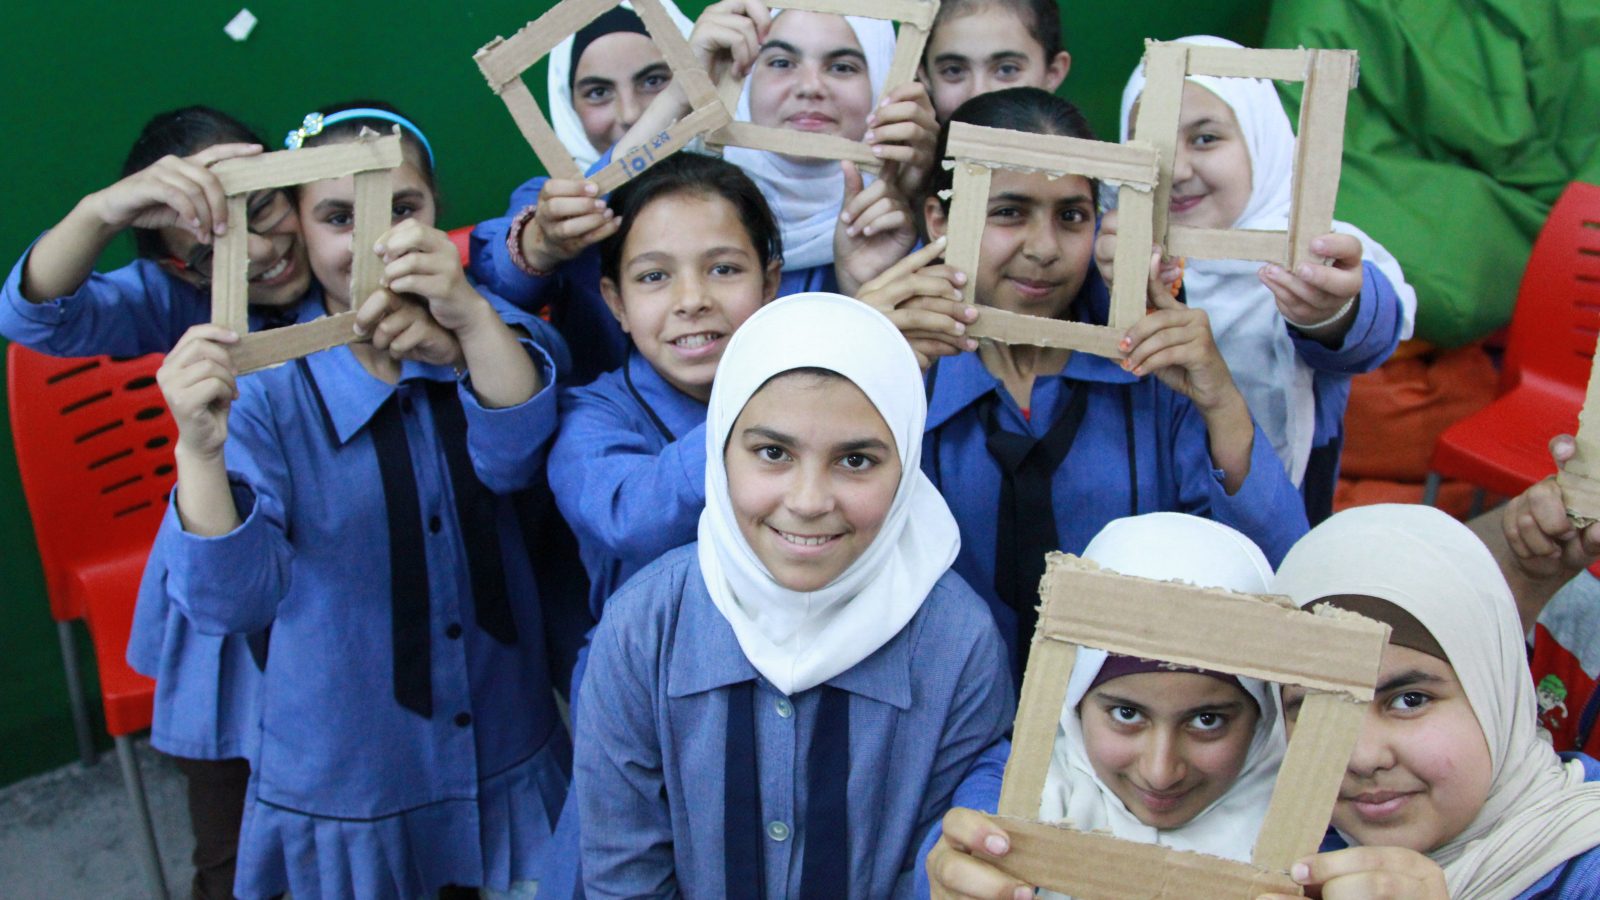 Young girls from the Kufr Yoba Primary School for Girls in Irbid, practicing the principles of framing